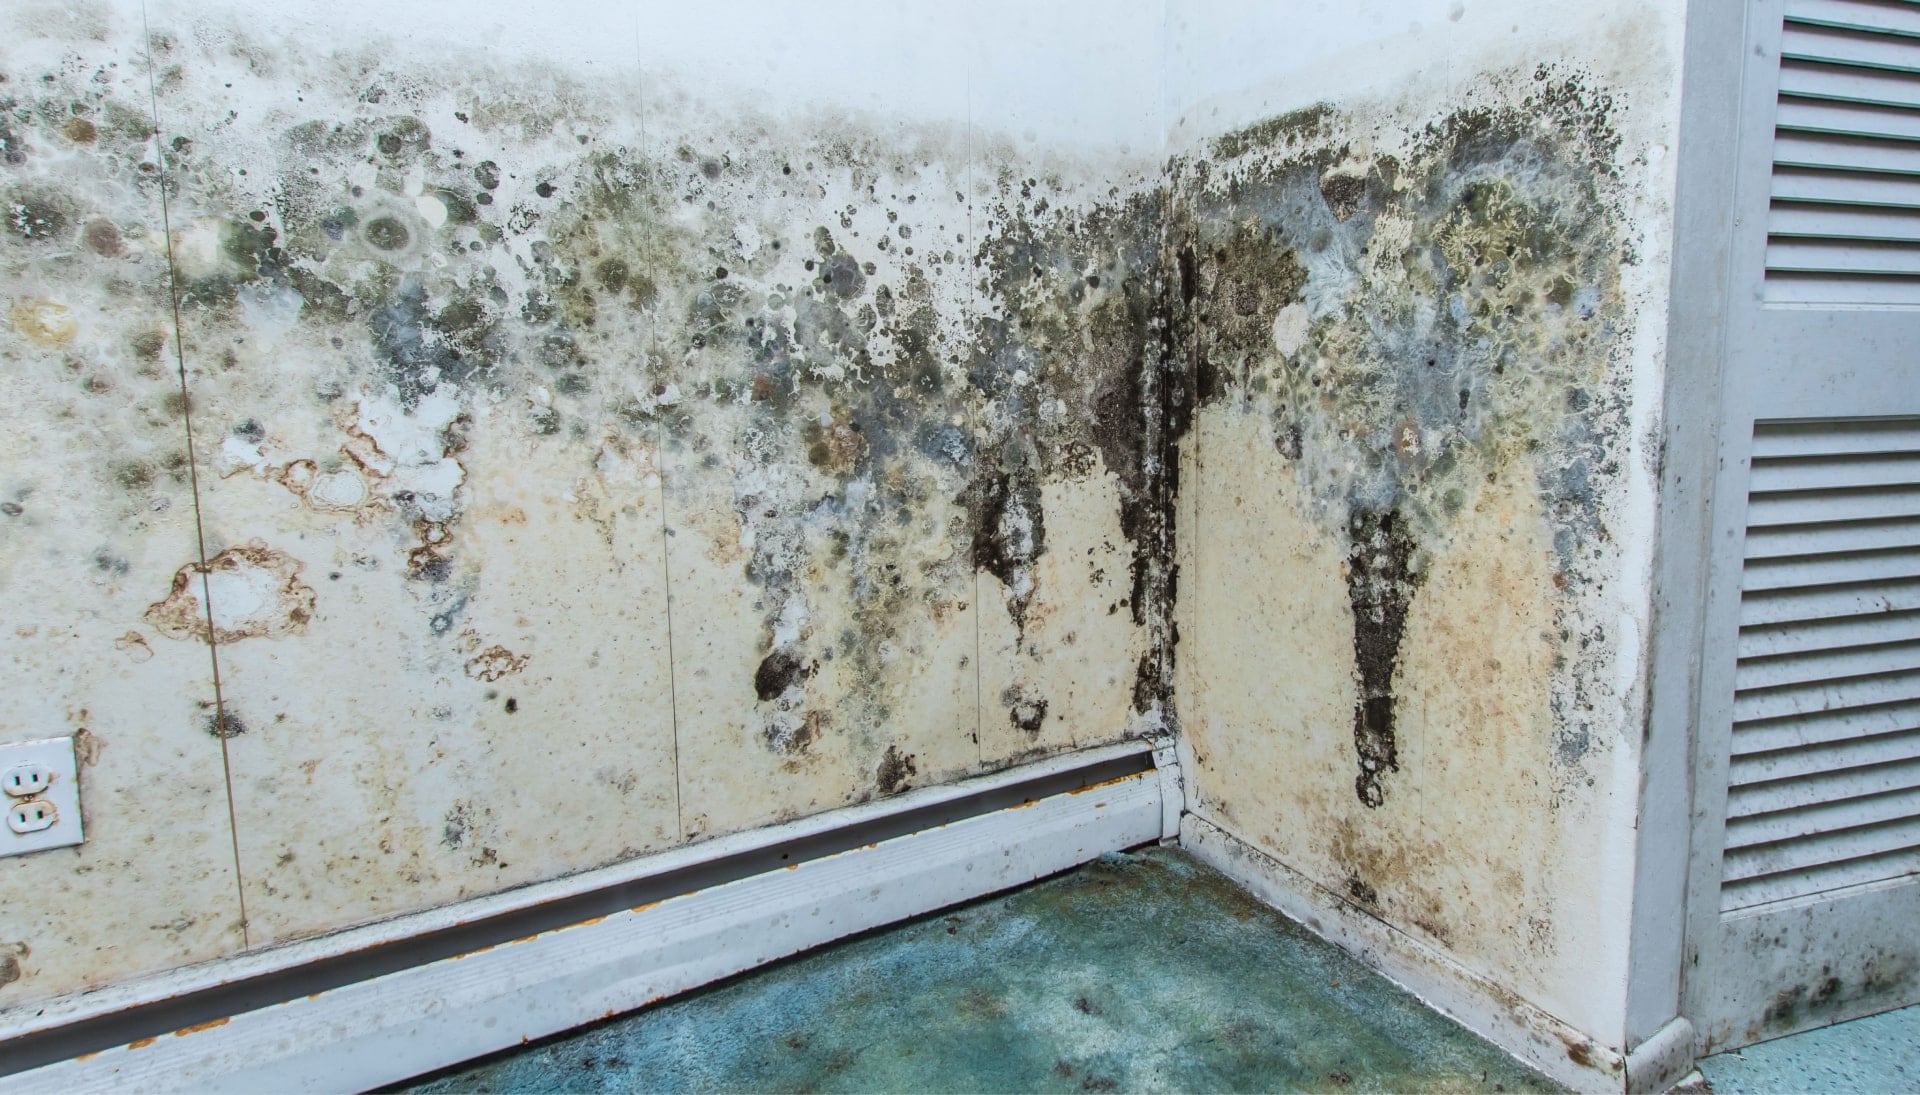 Professional mold removal, odor control, and water damage restoration service in Charleston, South Carolina.